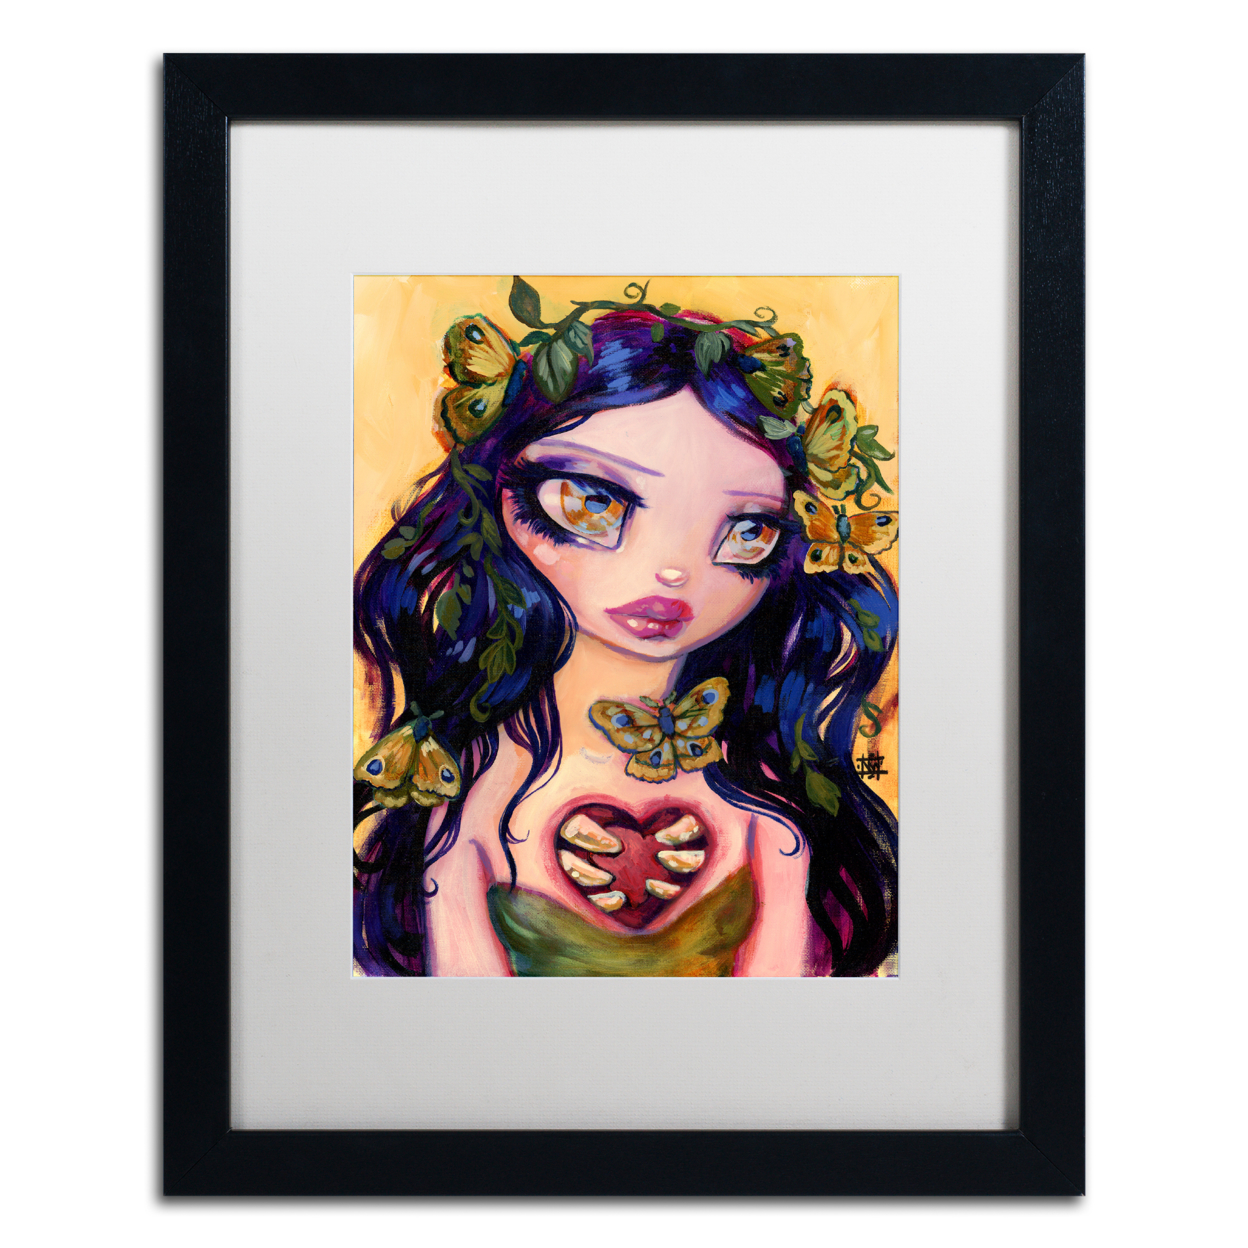 Natasha Wescoat 'Eat Your Heart Out' Black Wooden Framed Art 18 X 22 Inches